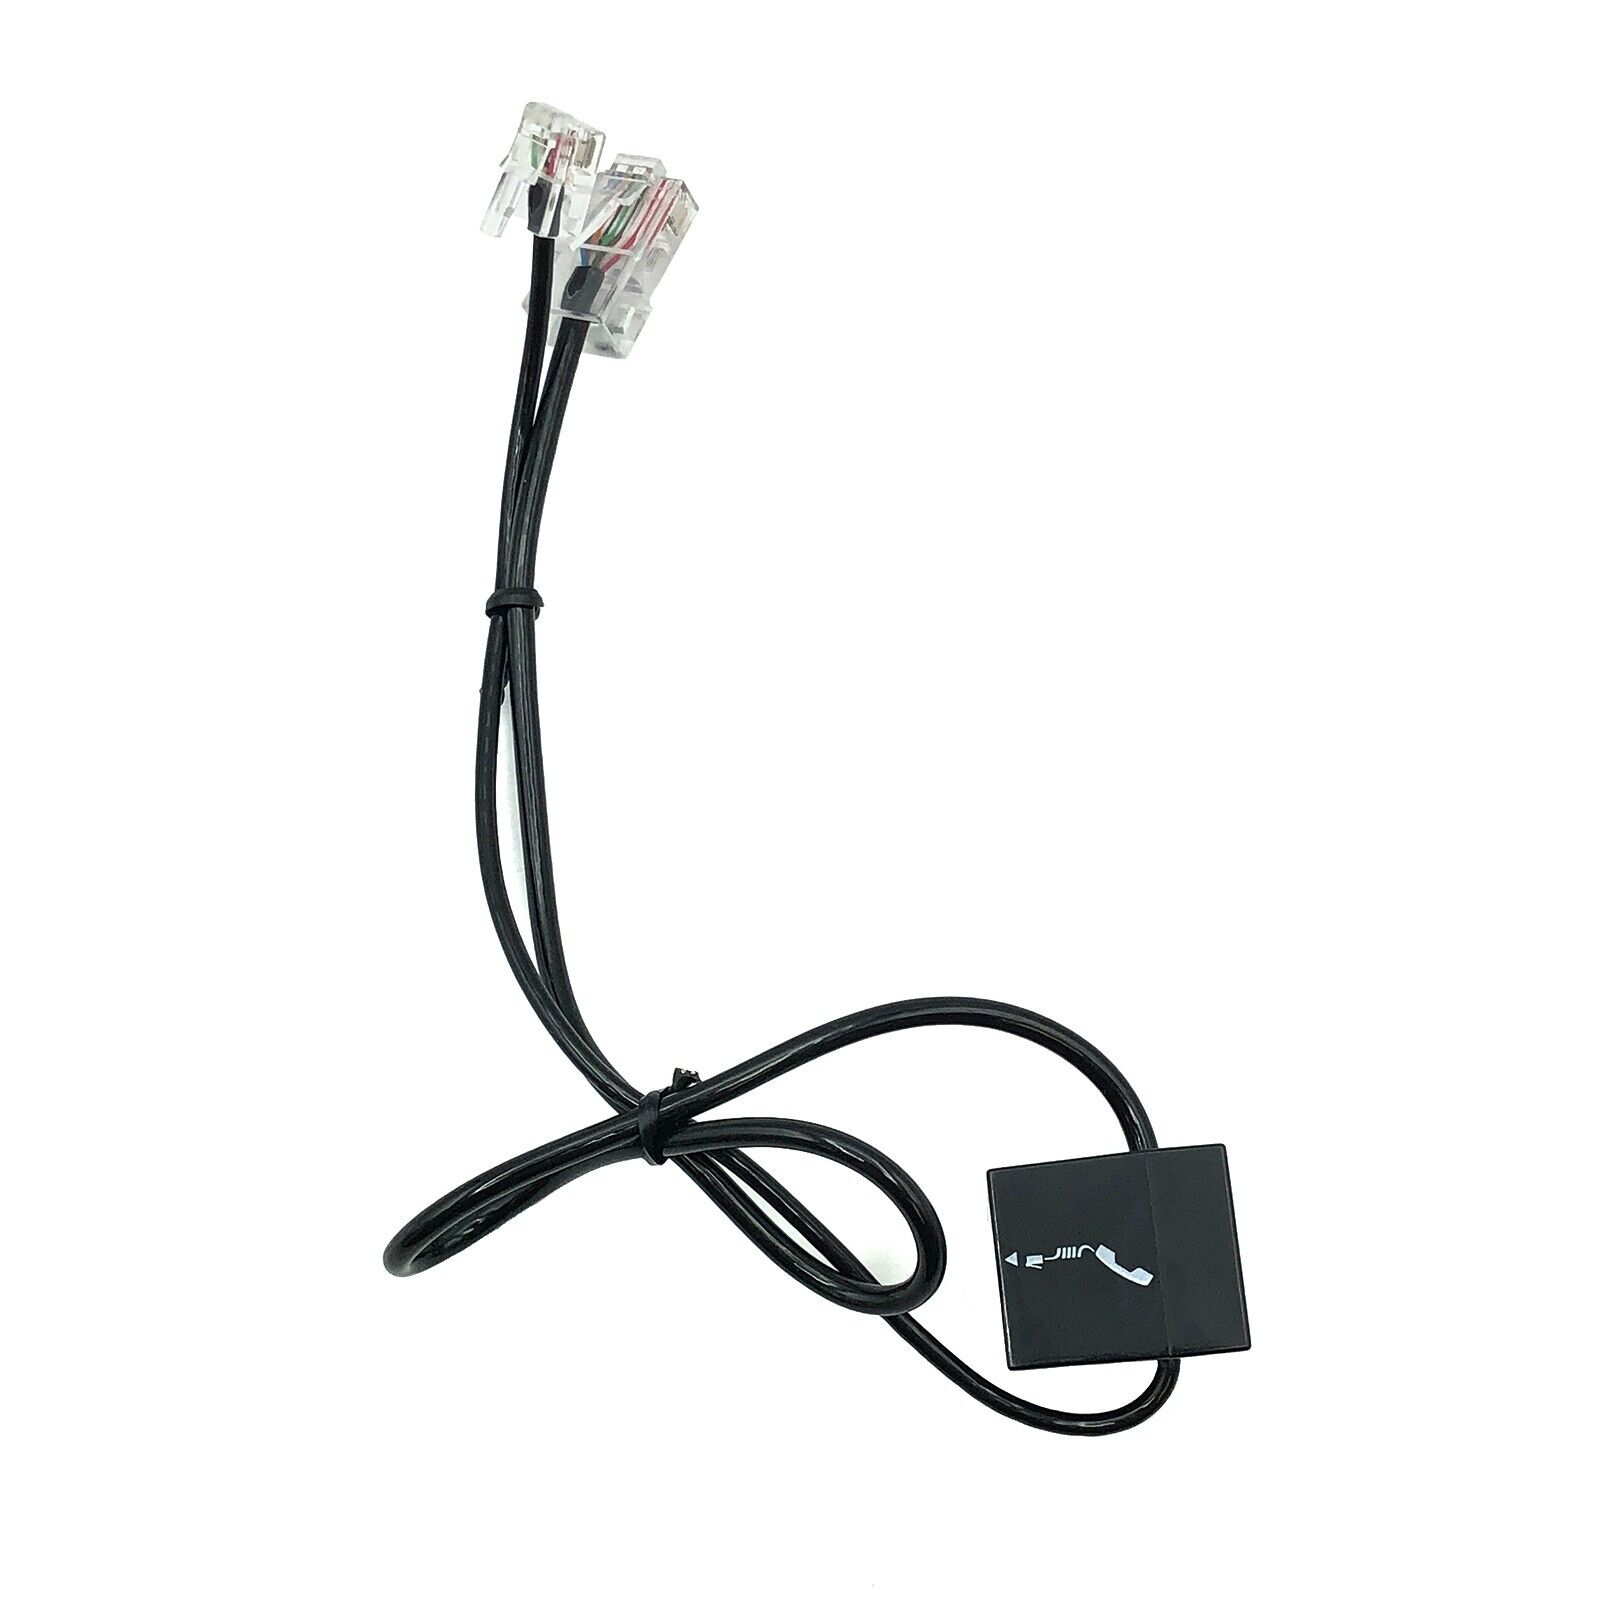 Plantronics Telephone Interface Cable Connects Your Telephone and Your Base